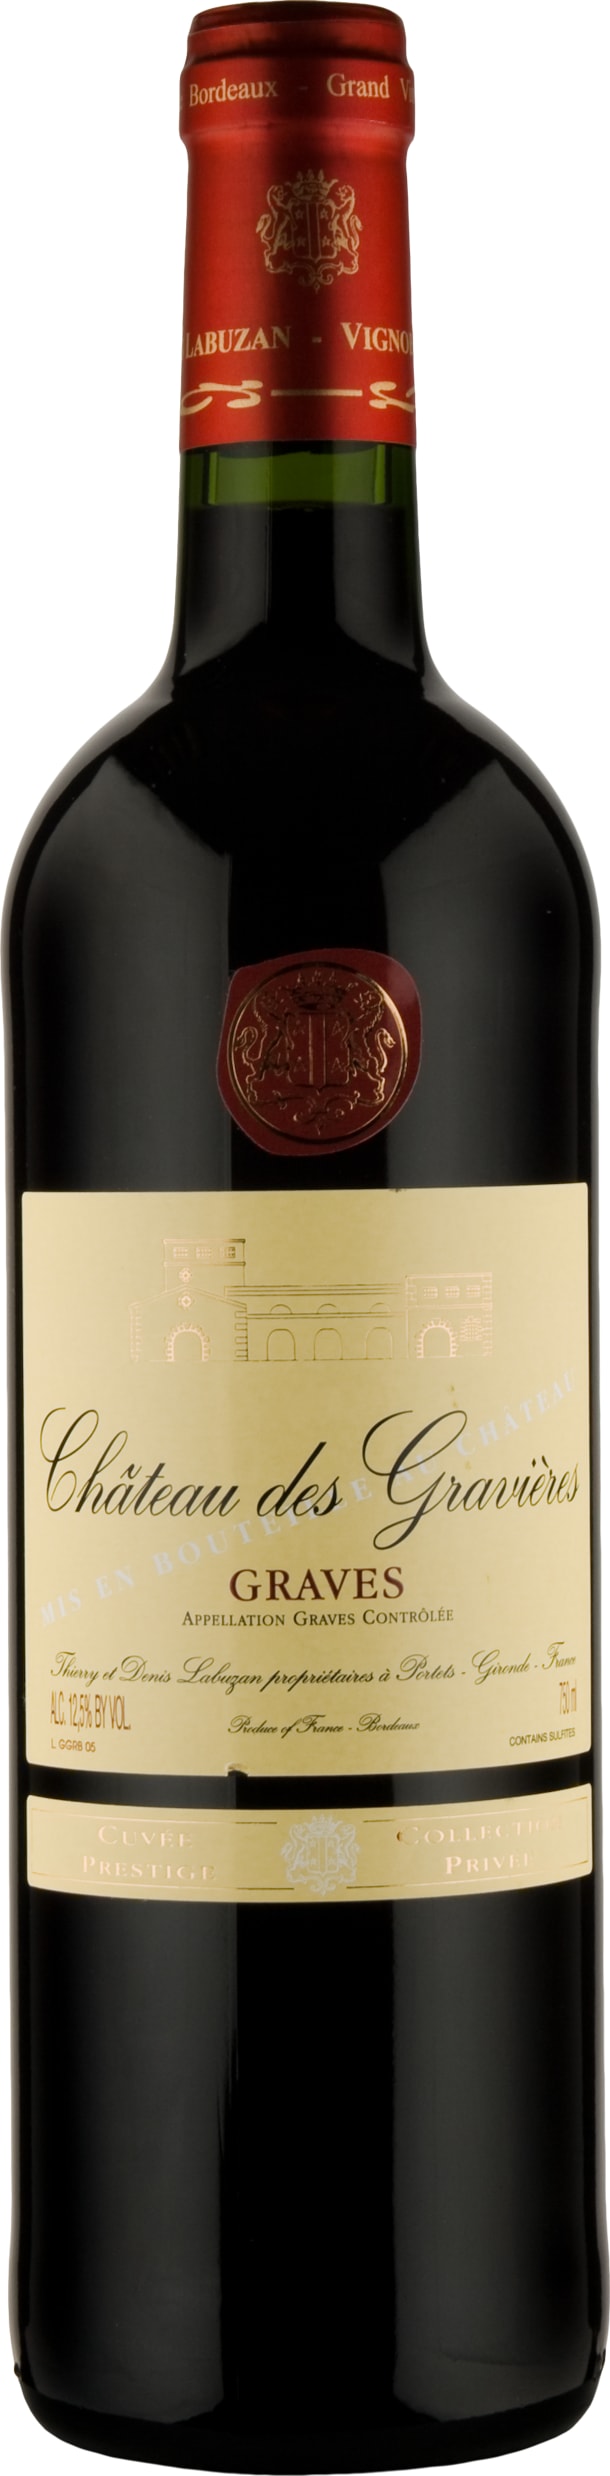 Chateau des Gravieres Graves Rouge 2020 75cl - Buy Chateau des Gravieres Wines from GREAT WINES DIRECT wine shop